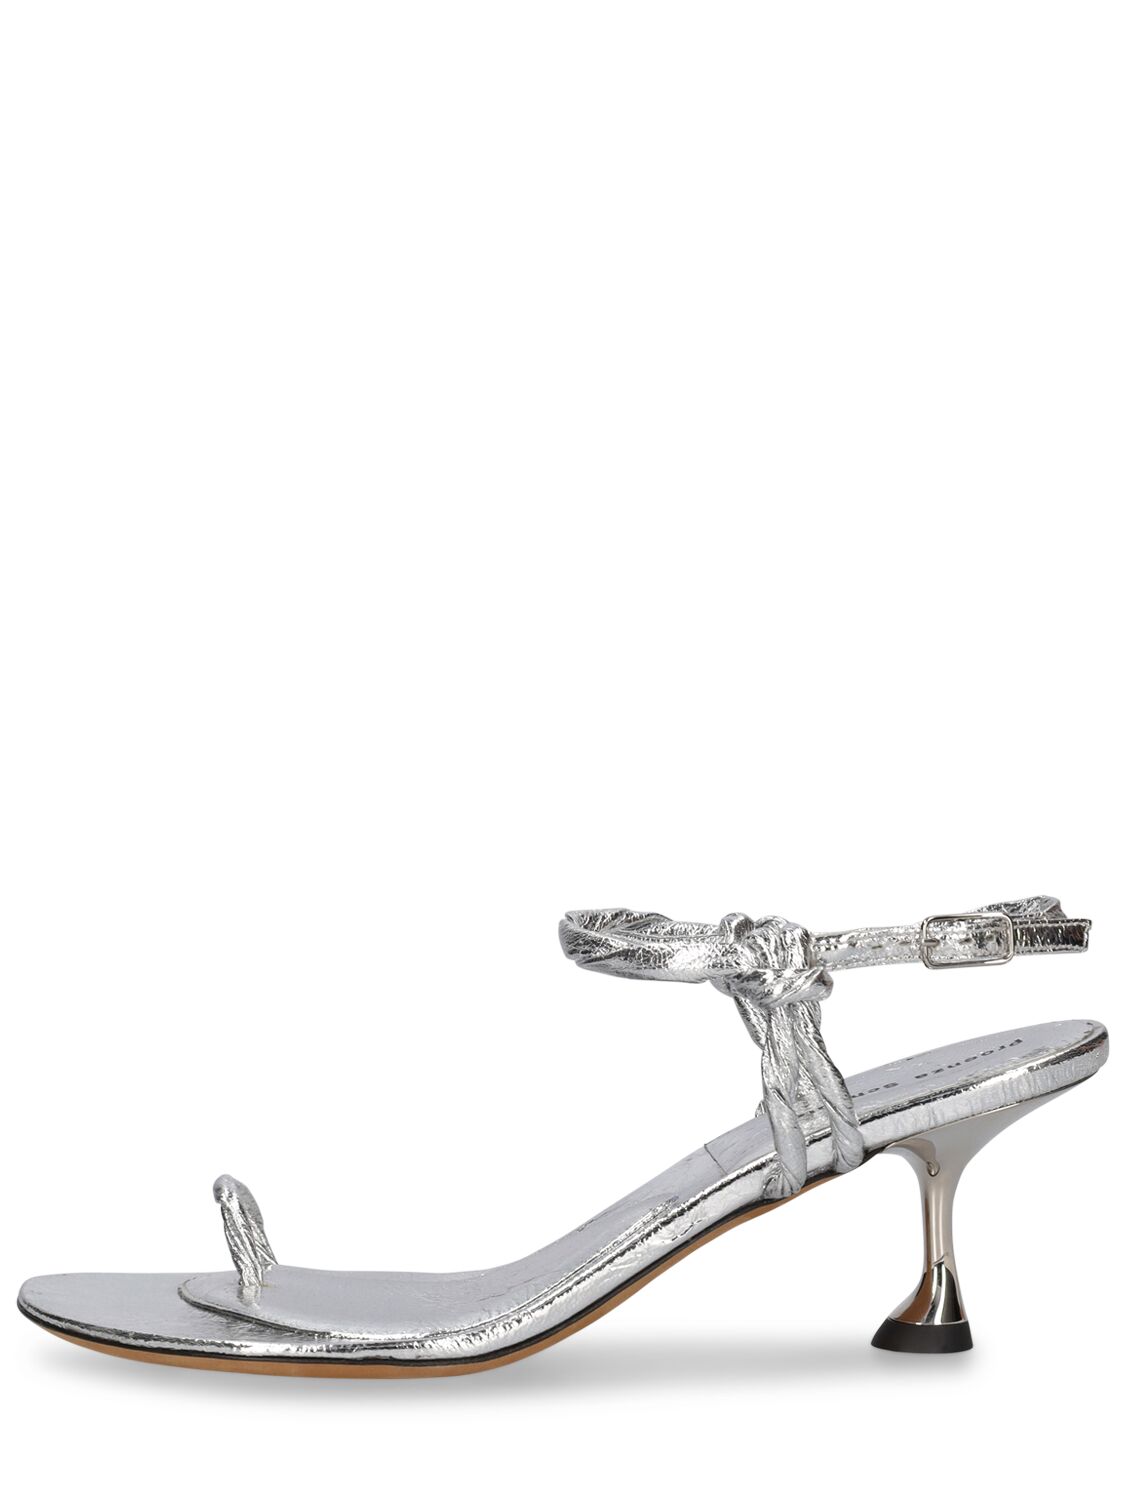 Proenza Schouler 65mm Metallic Leather Toe Ring Sandals In Silver